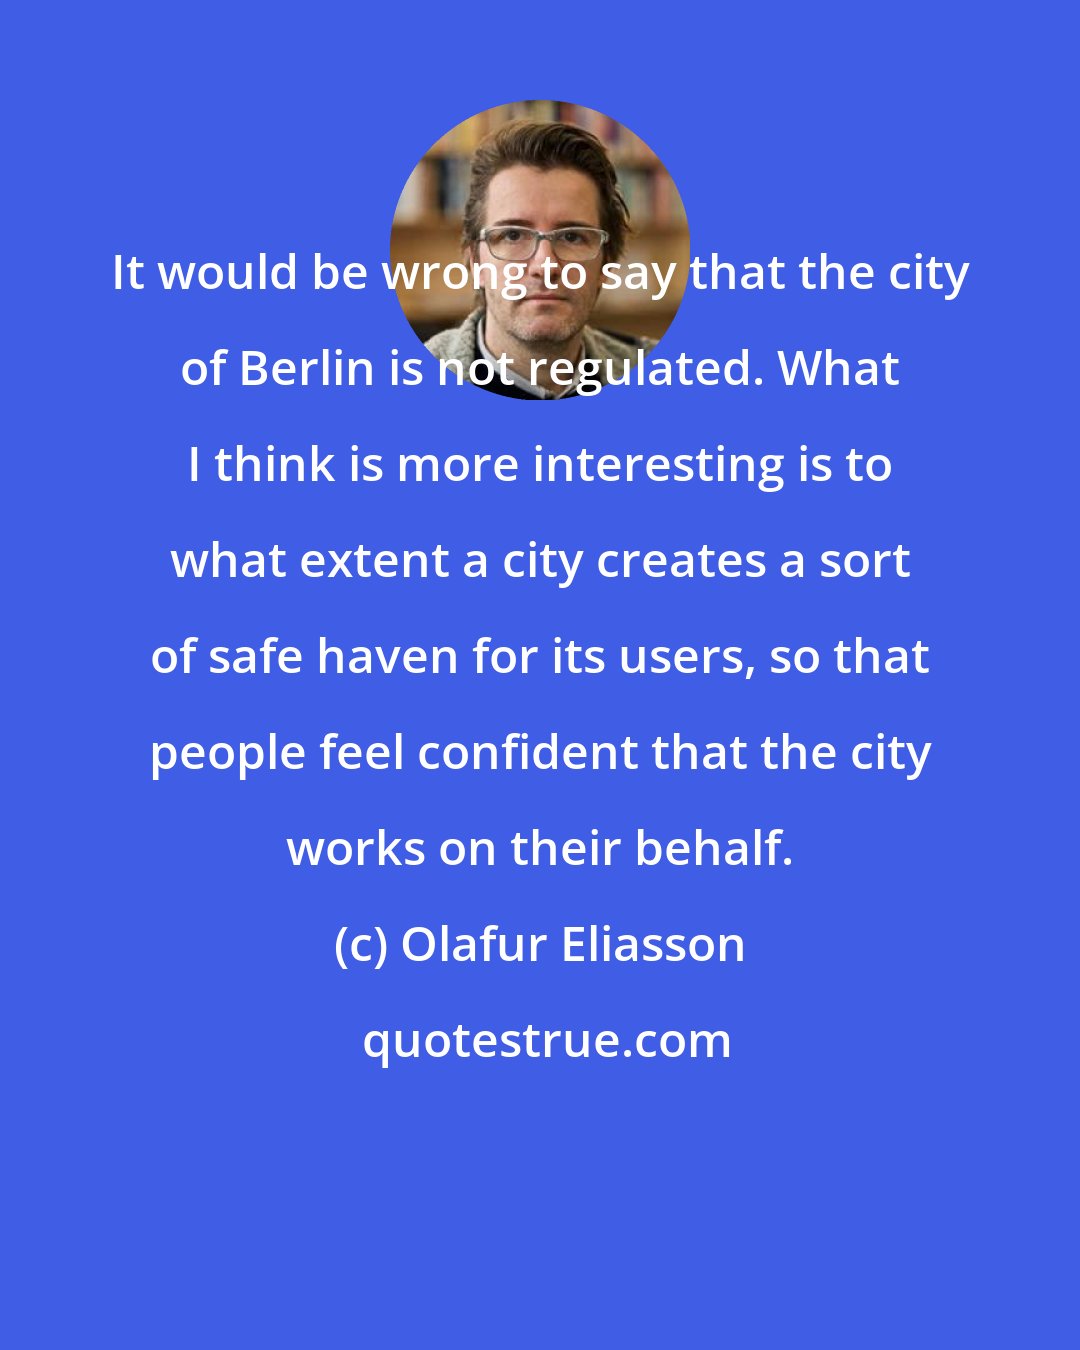 Olafur Eliasson: It would be wrong to say that the city of Berlin is not regulated. What I think is more interesting is to what extent a city creates a sort of safe haven for its users, so that people feel confident that the city works on their behalf.